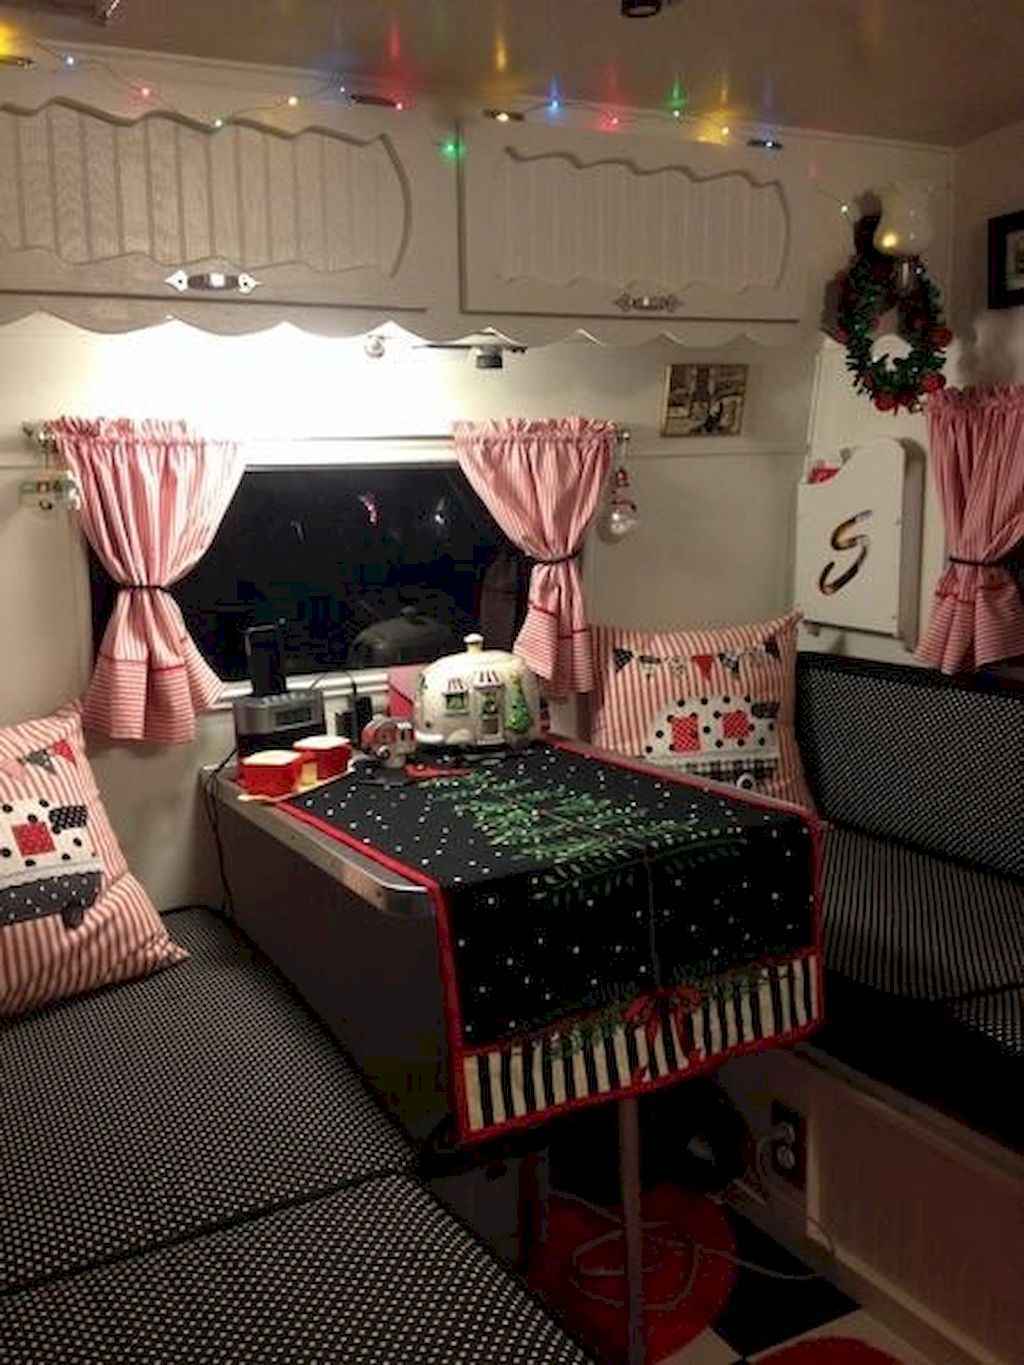 20-Awesome-RV-Campers-Christmas-Decorati